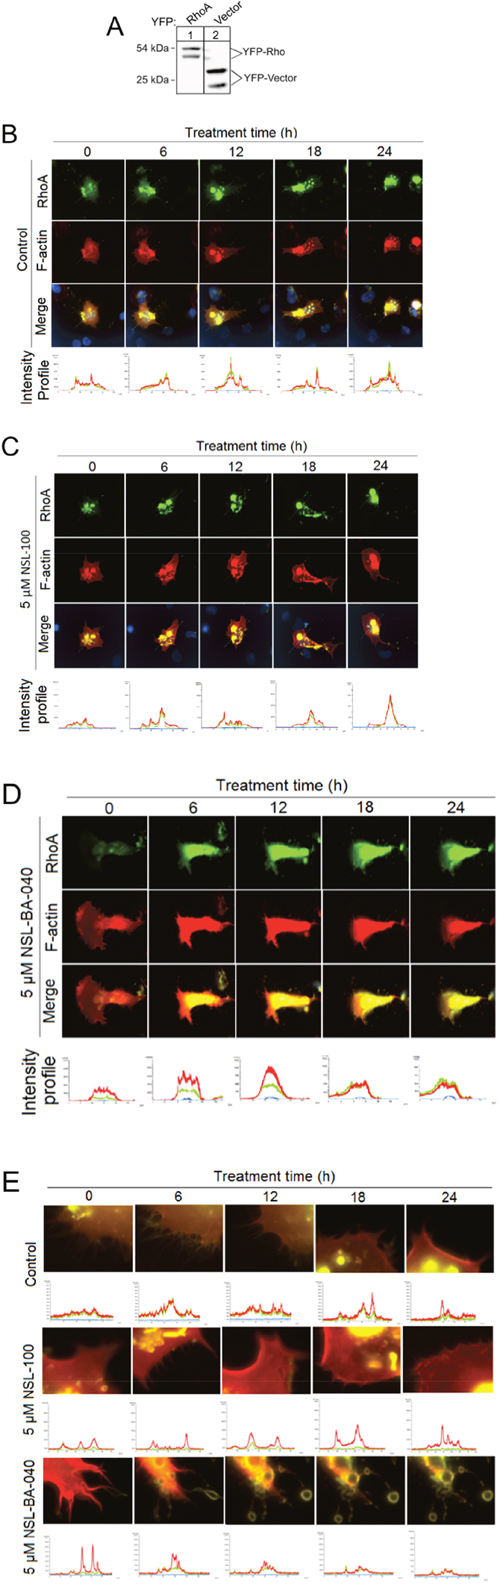 PCAIs decouple RhoA/F-actin intensity profiles, induce exocytosis and loss of F-actin and disrupt Filopodia in H1299 cells.